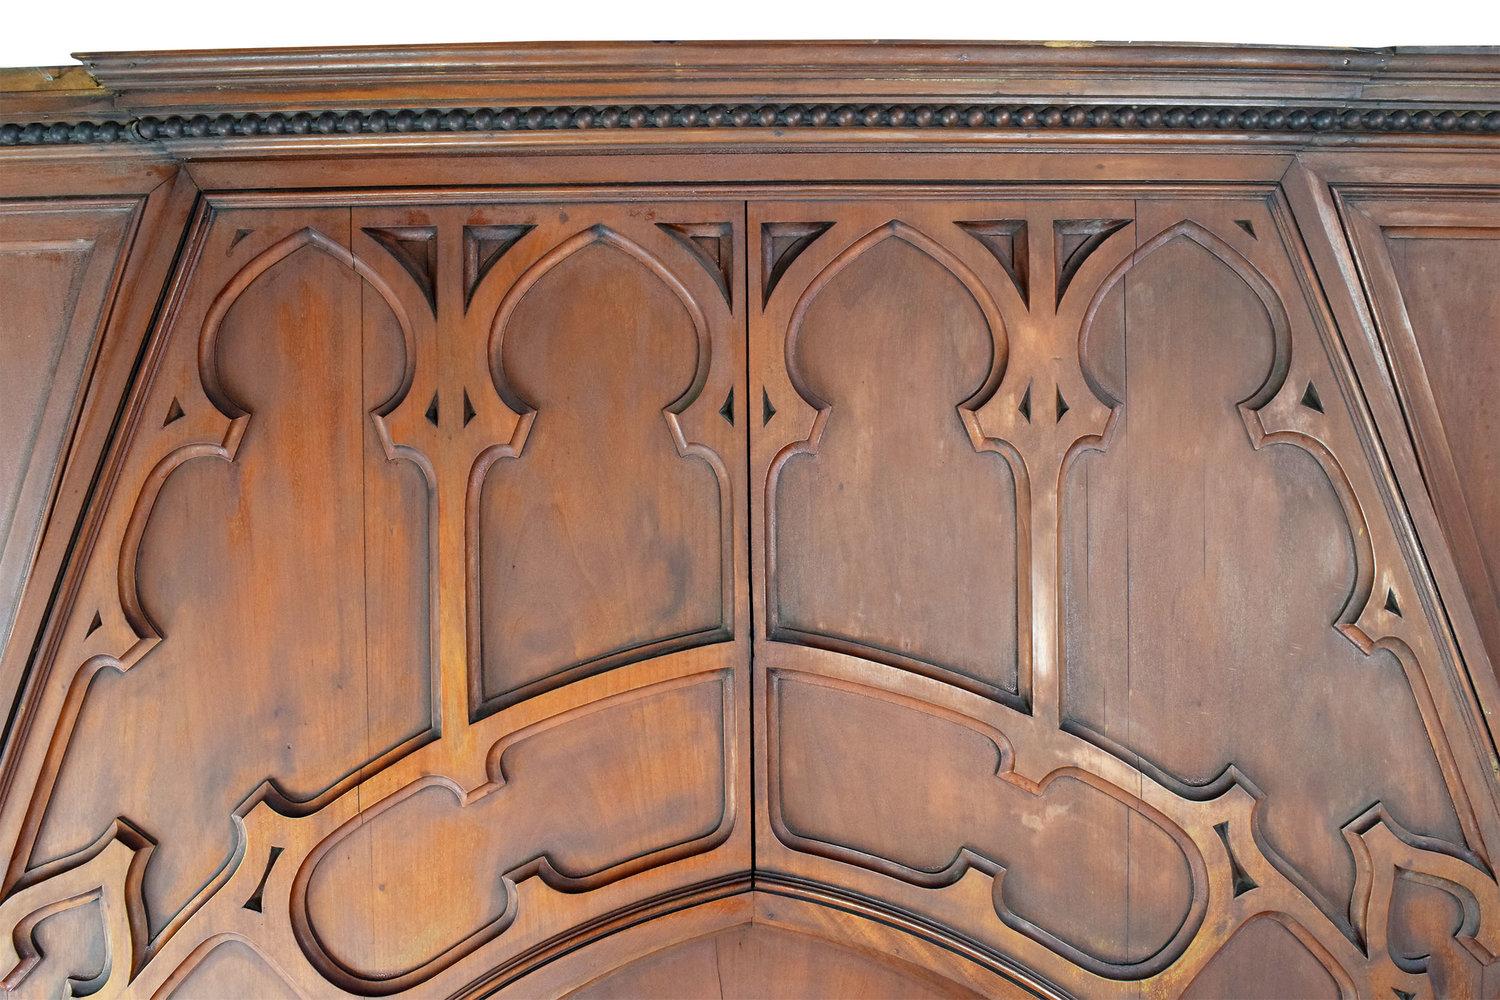 This massive over-mantel made from walnut is so rich and detailed with beauty. This mantel is from a mansion owned by Harmar Denny, which was built in 1895. There are magnificent carvings throughout the entire mantel. These designs flow from the top